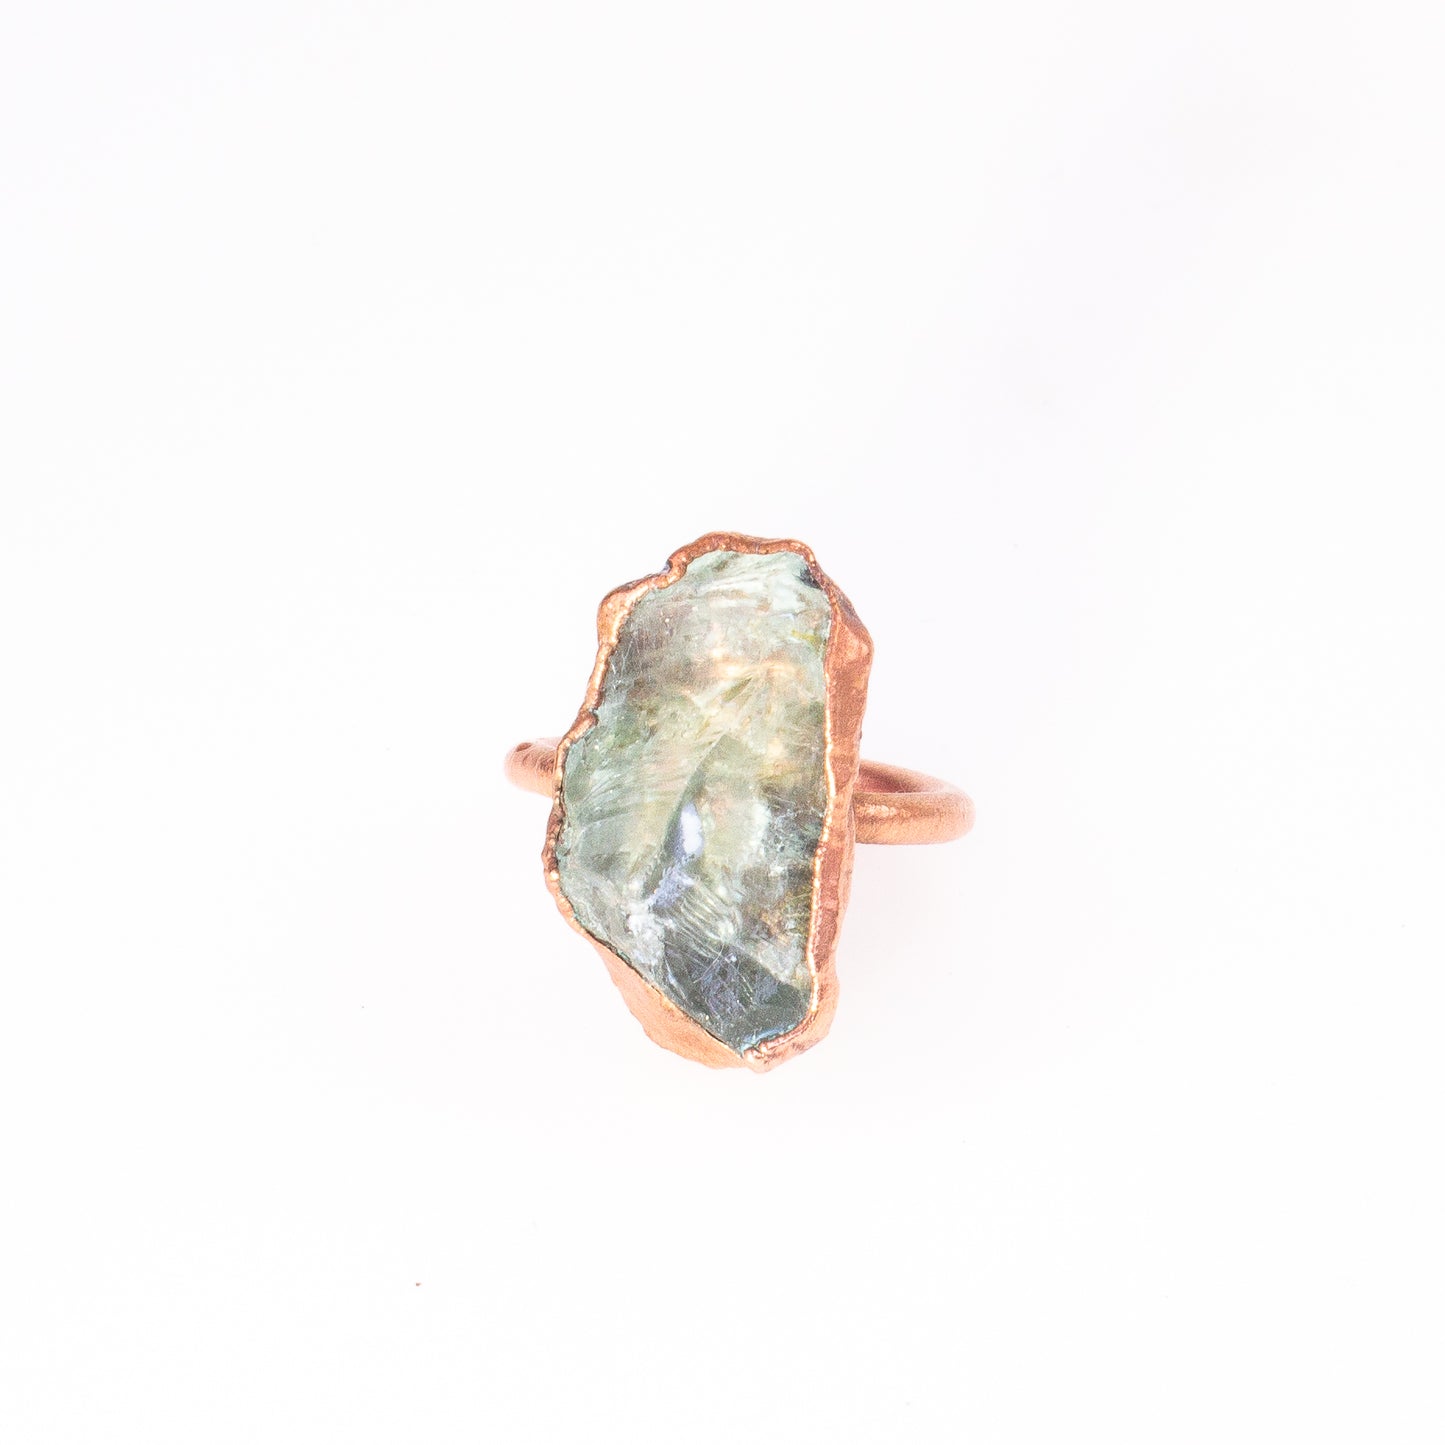 X Large Aquamarine Solitaire Ring, Vertical (March birthstone)